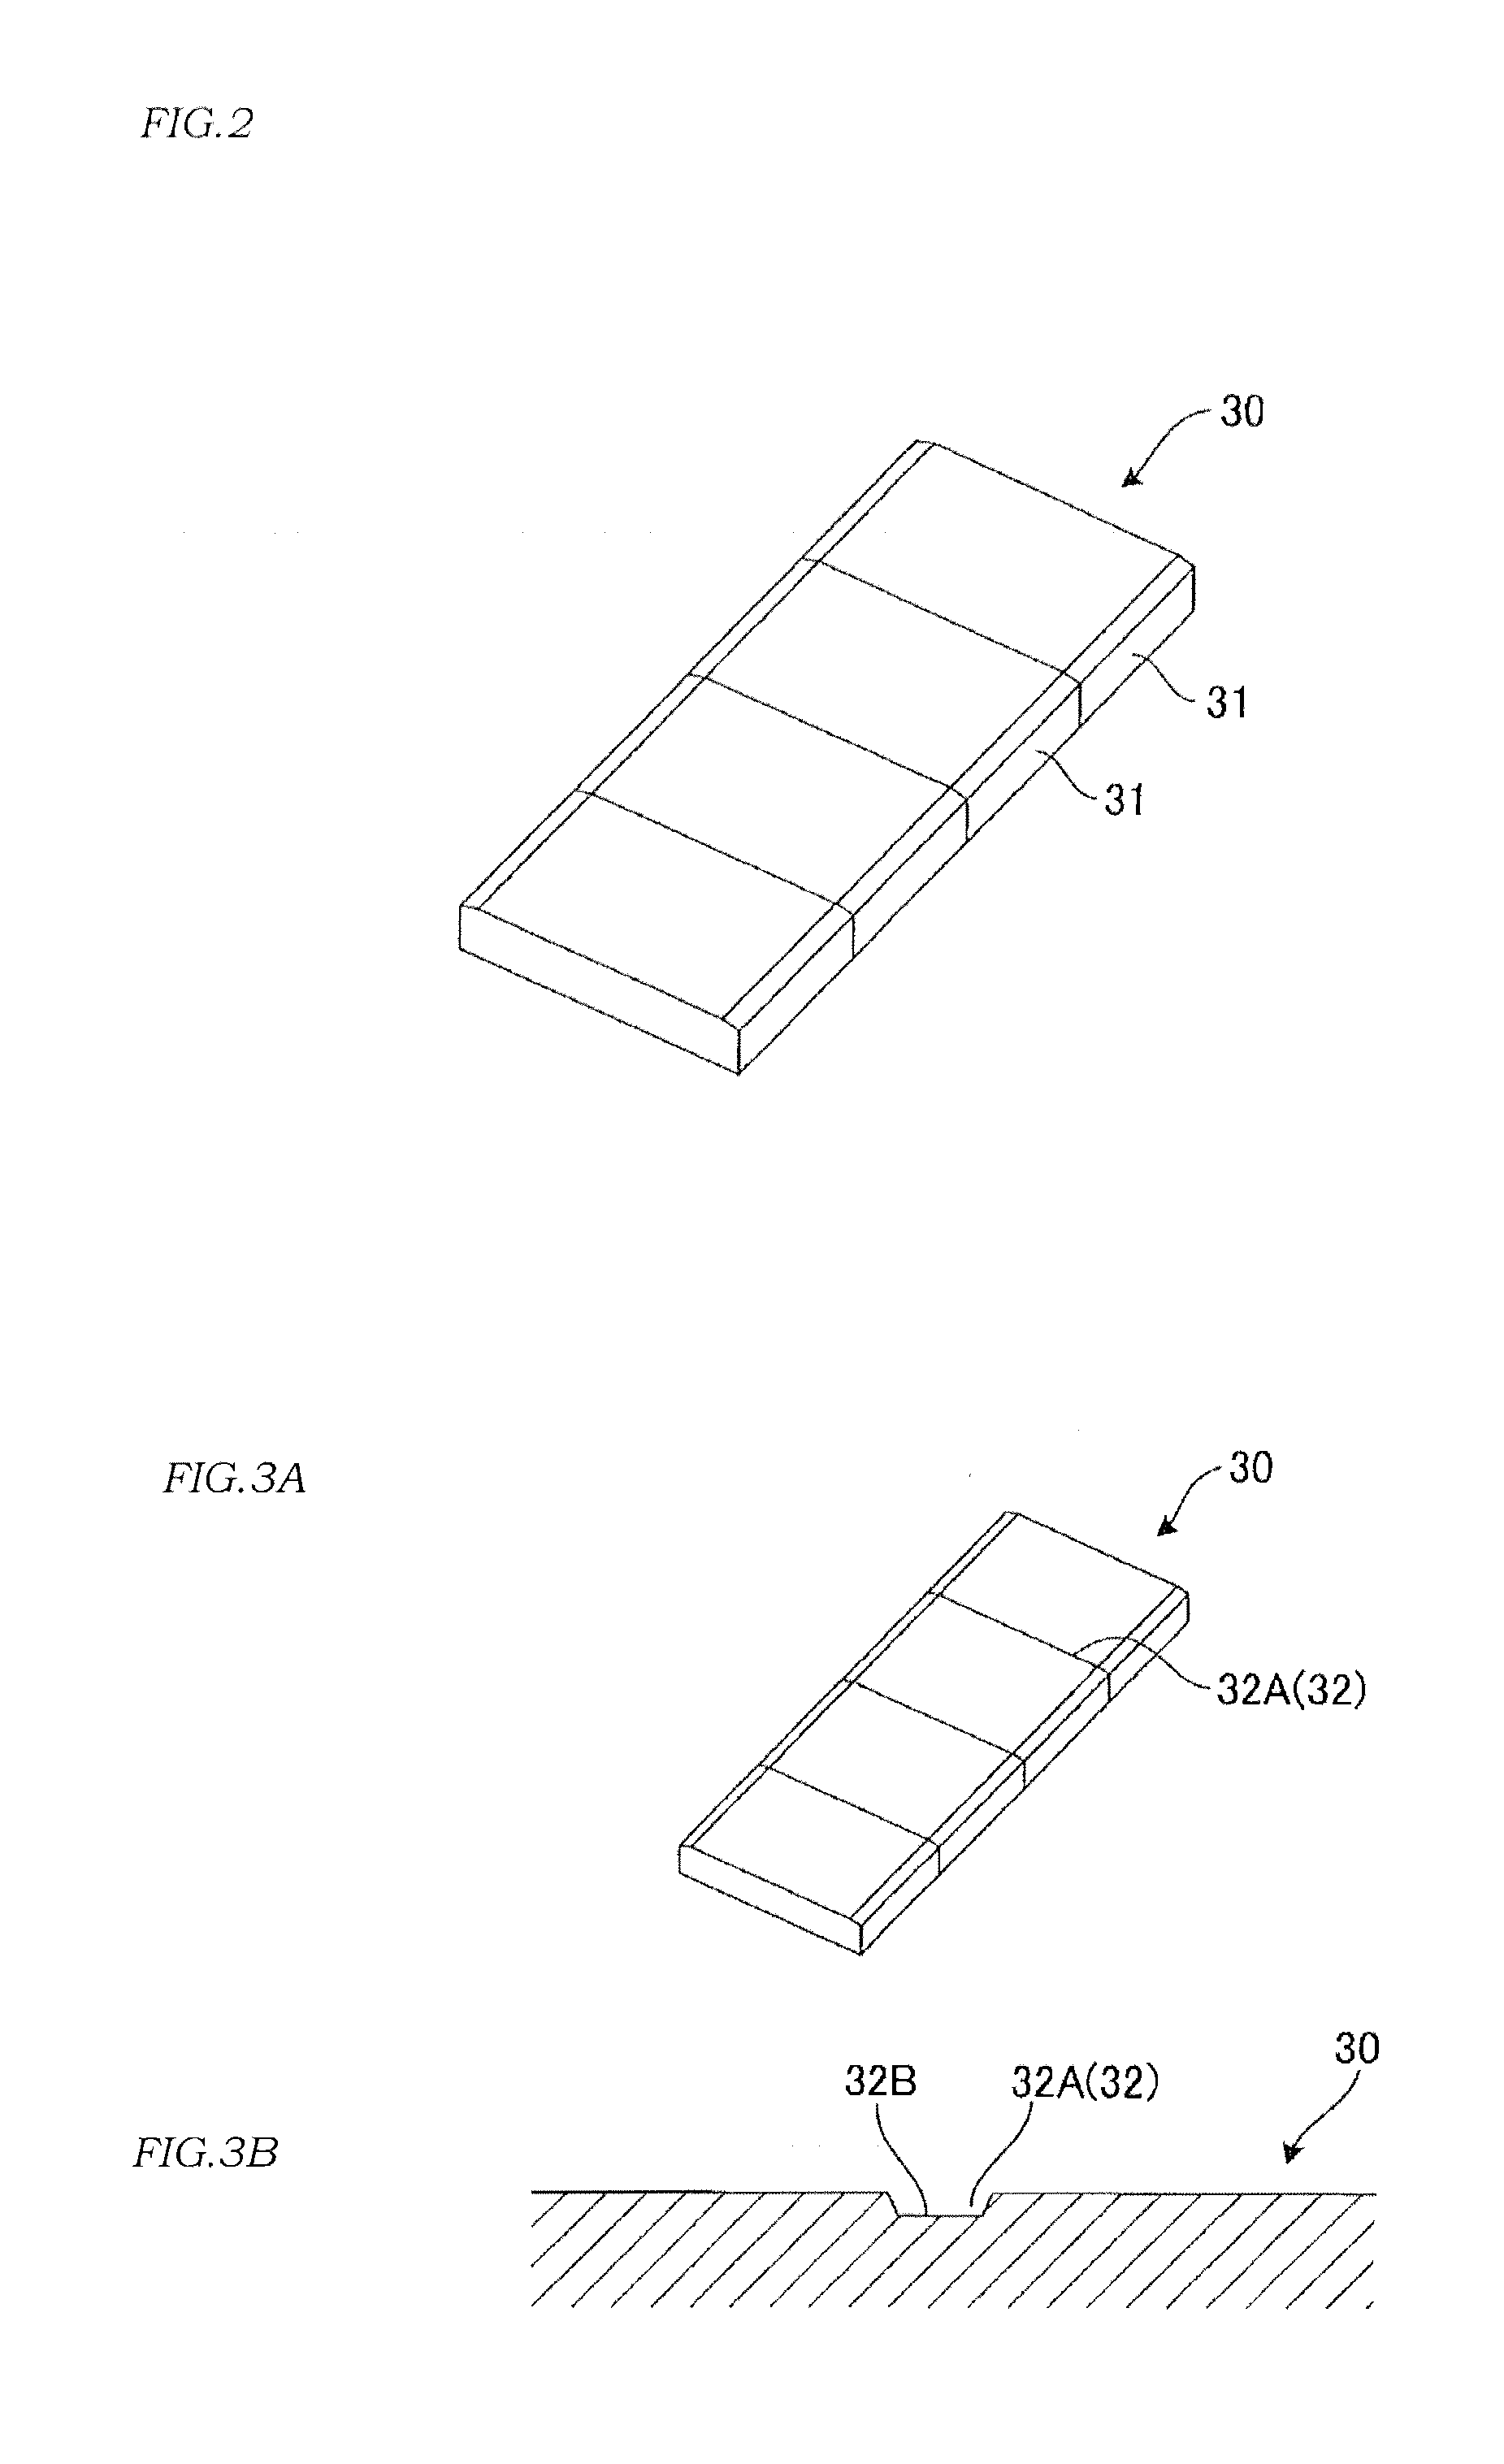 Manufacturing method of a permanent magnet dispoded in a rotating electrical machine